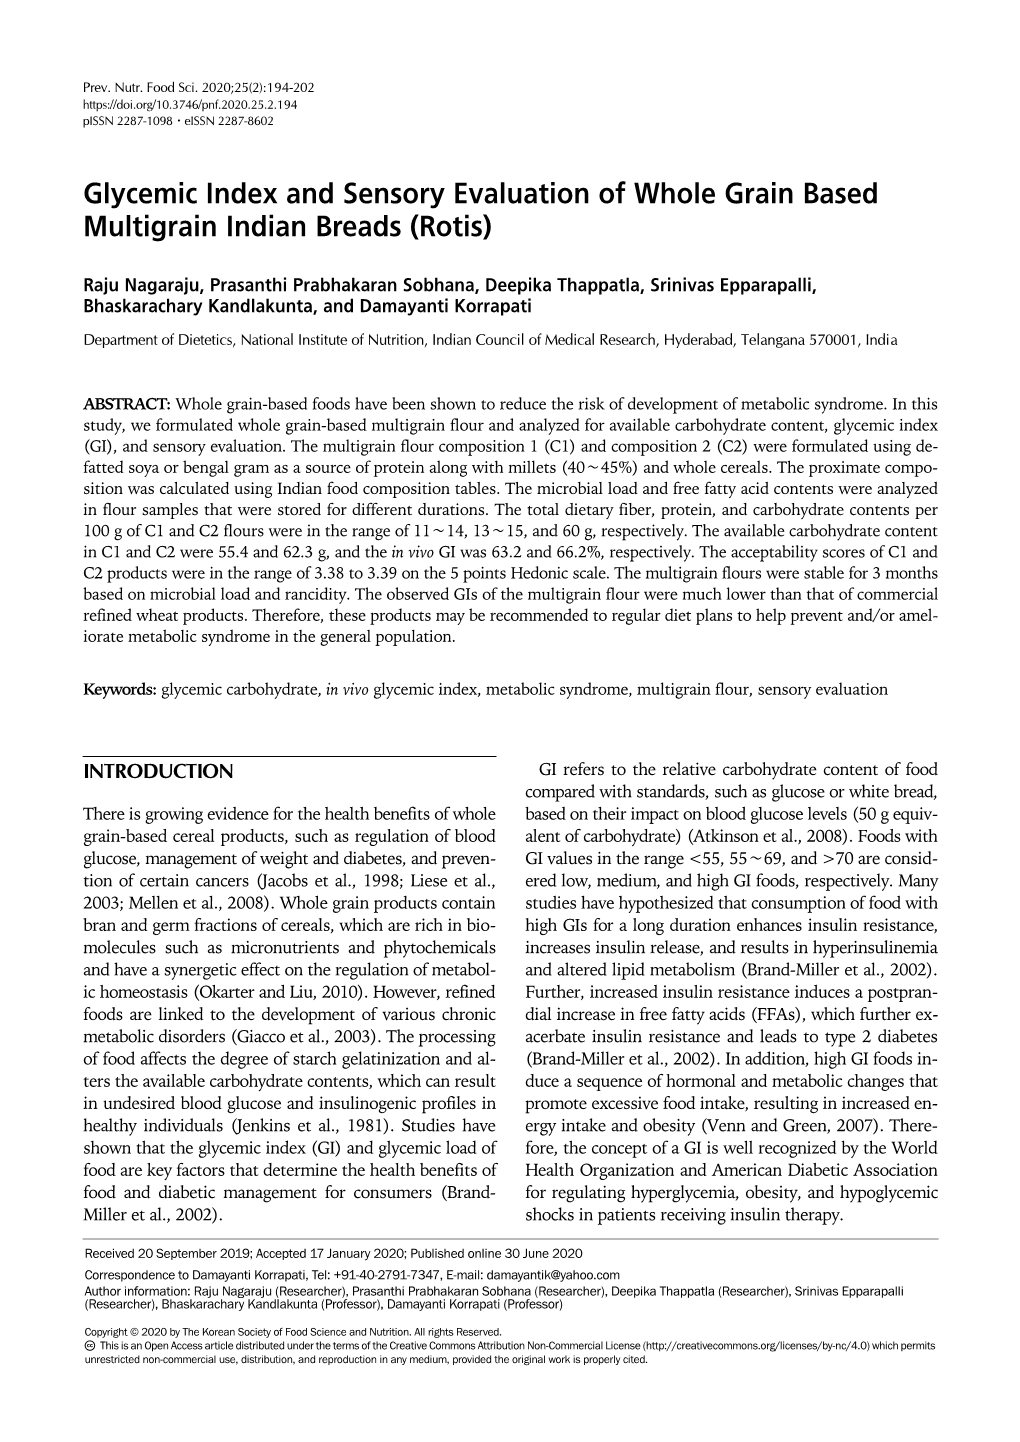 Glycemic Index and Sensory Evaluation of Whole Grain Based Multigrain Indian Breads (Rotis)